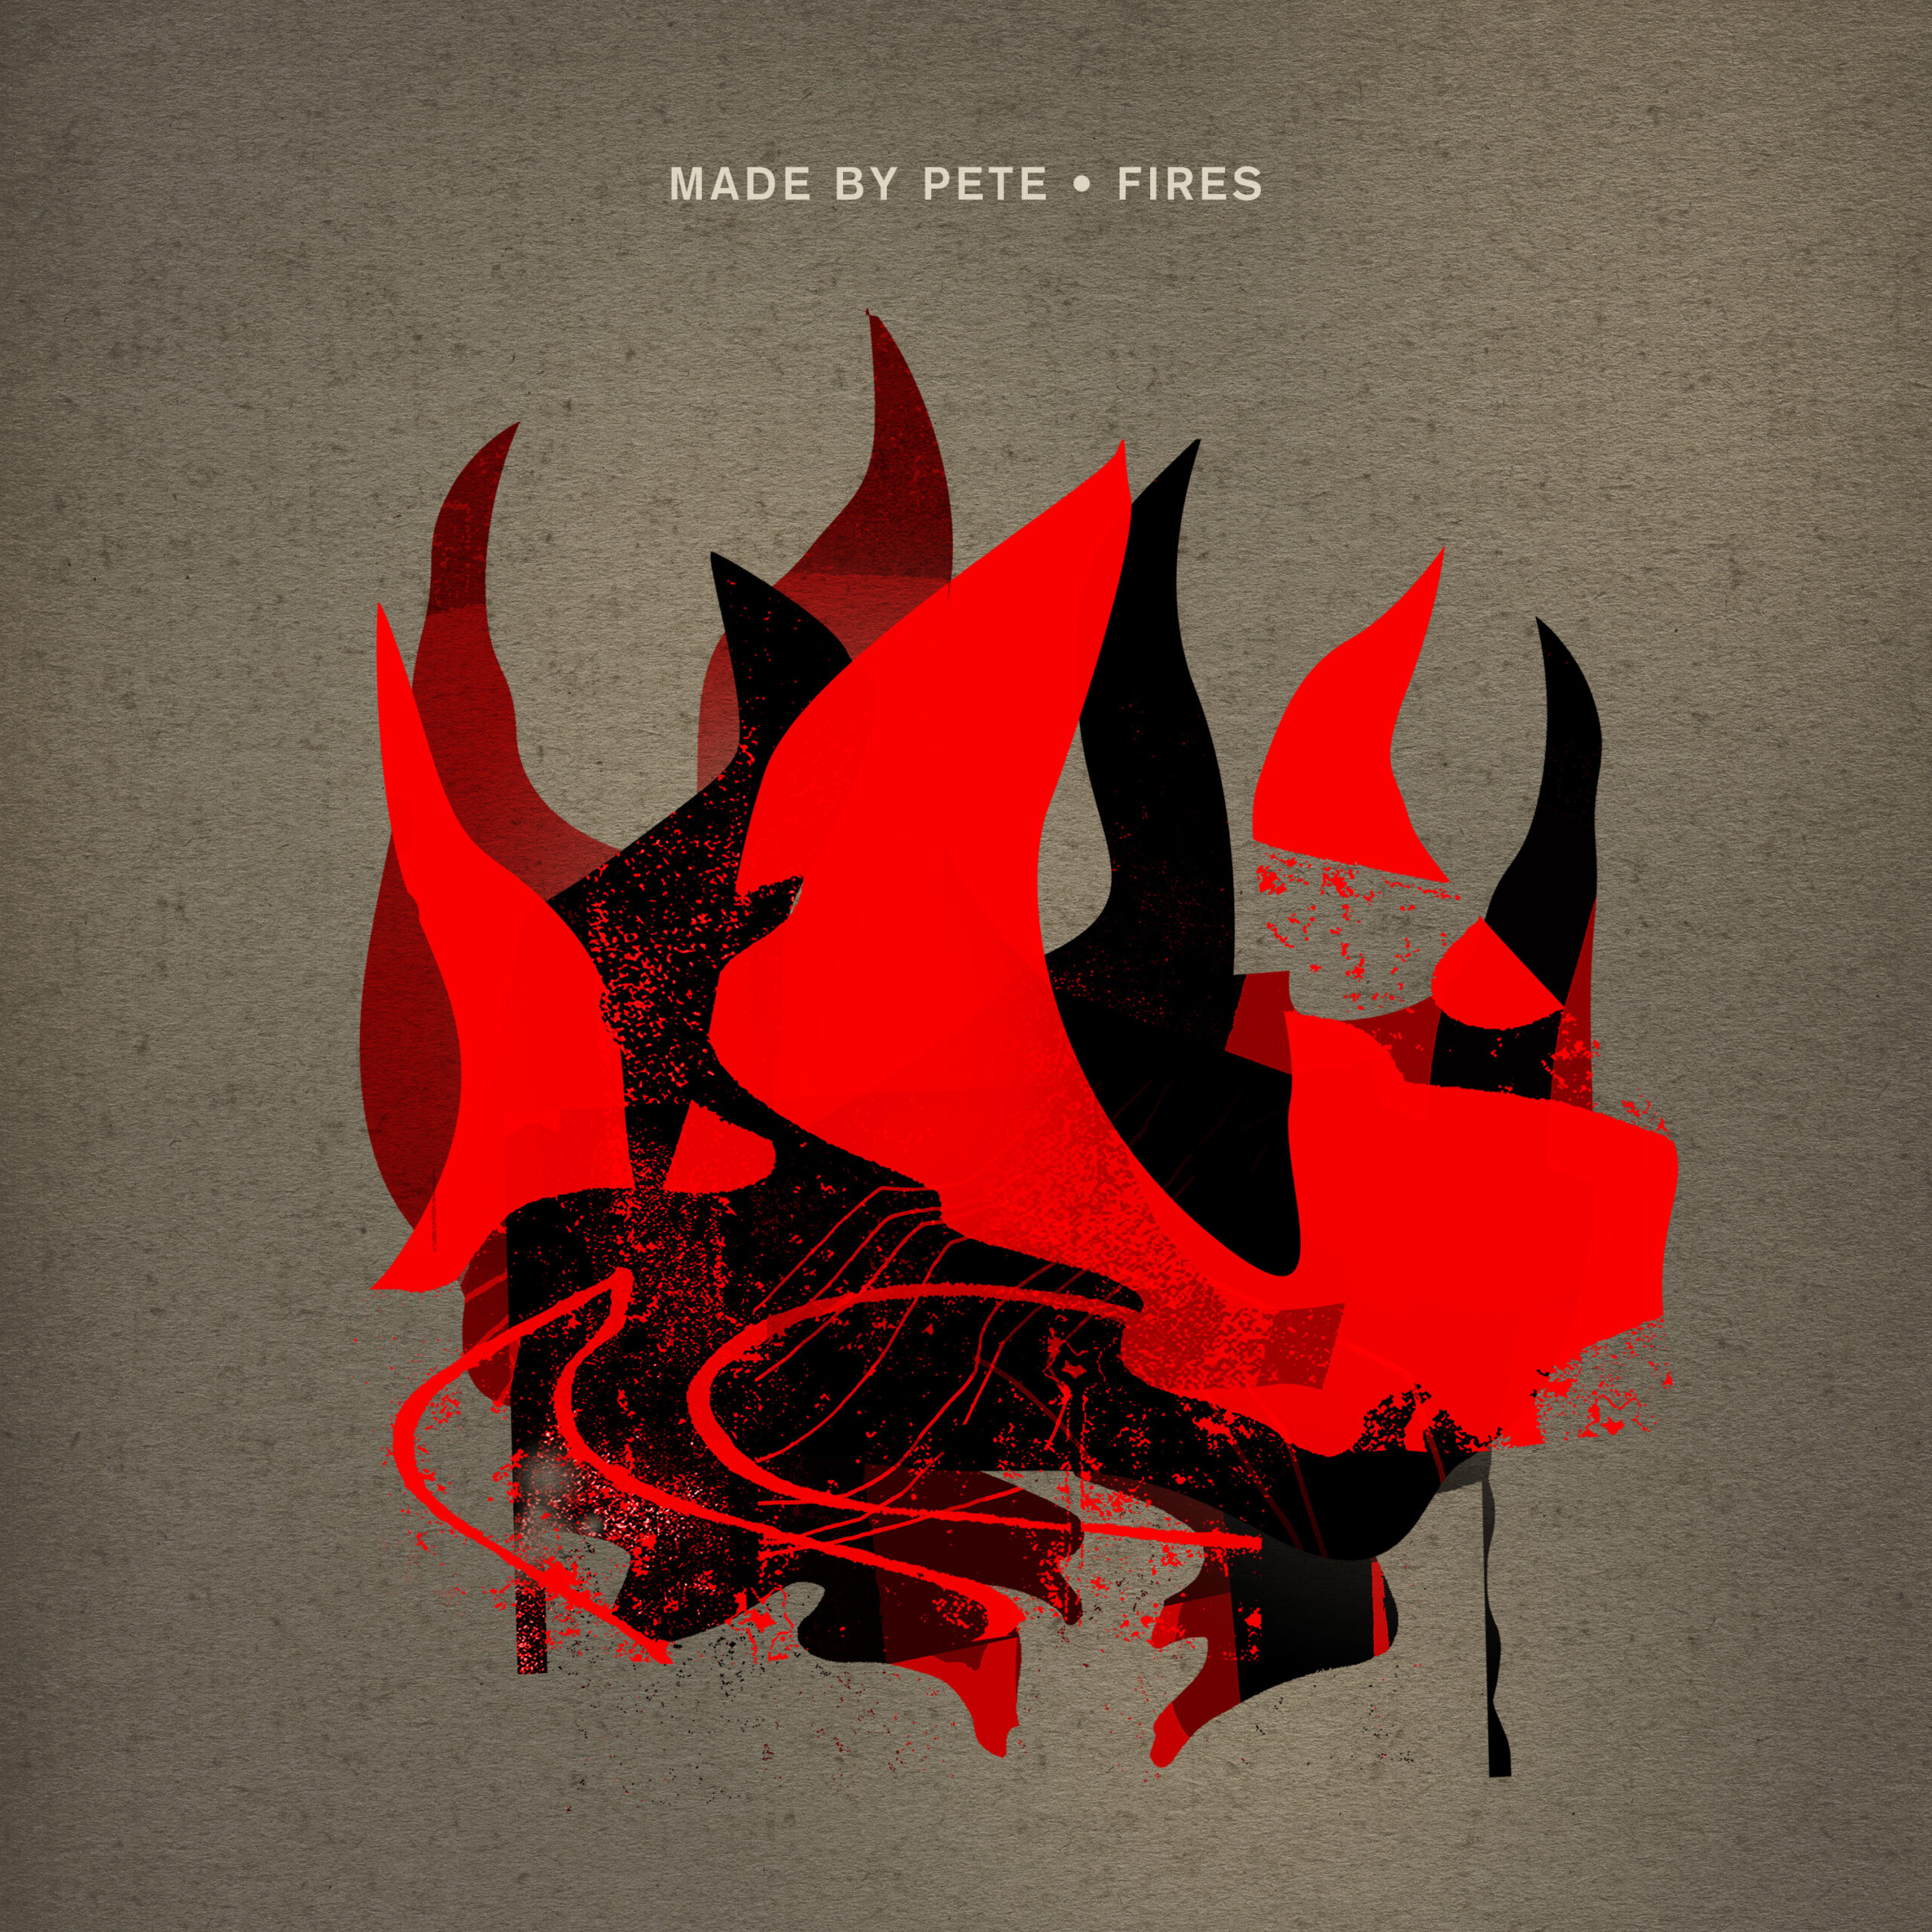 This image is a visual cue for the review of Made By Pete - Fires